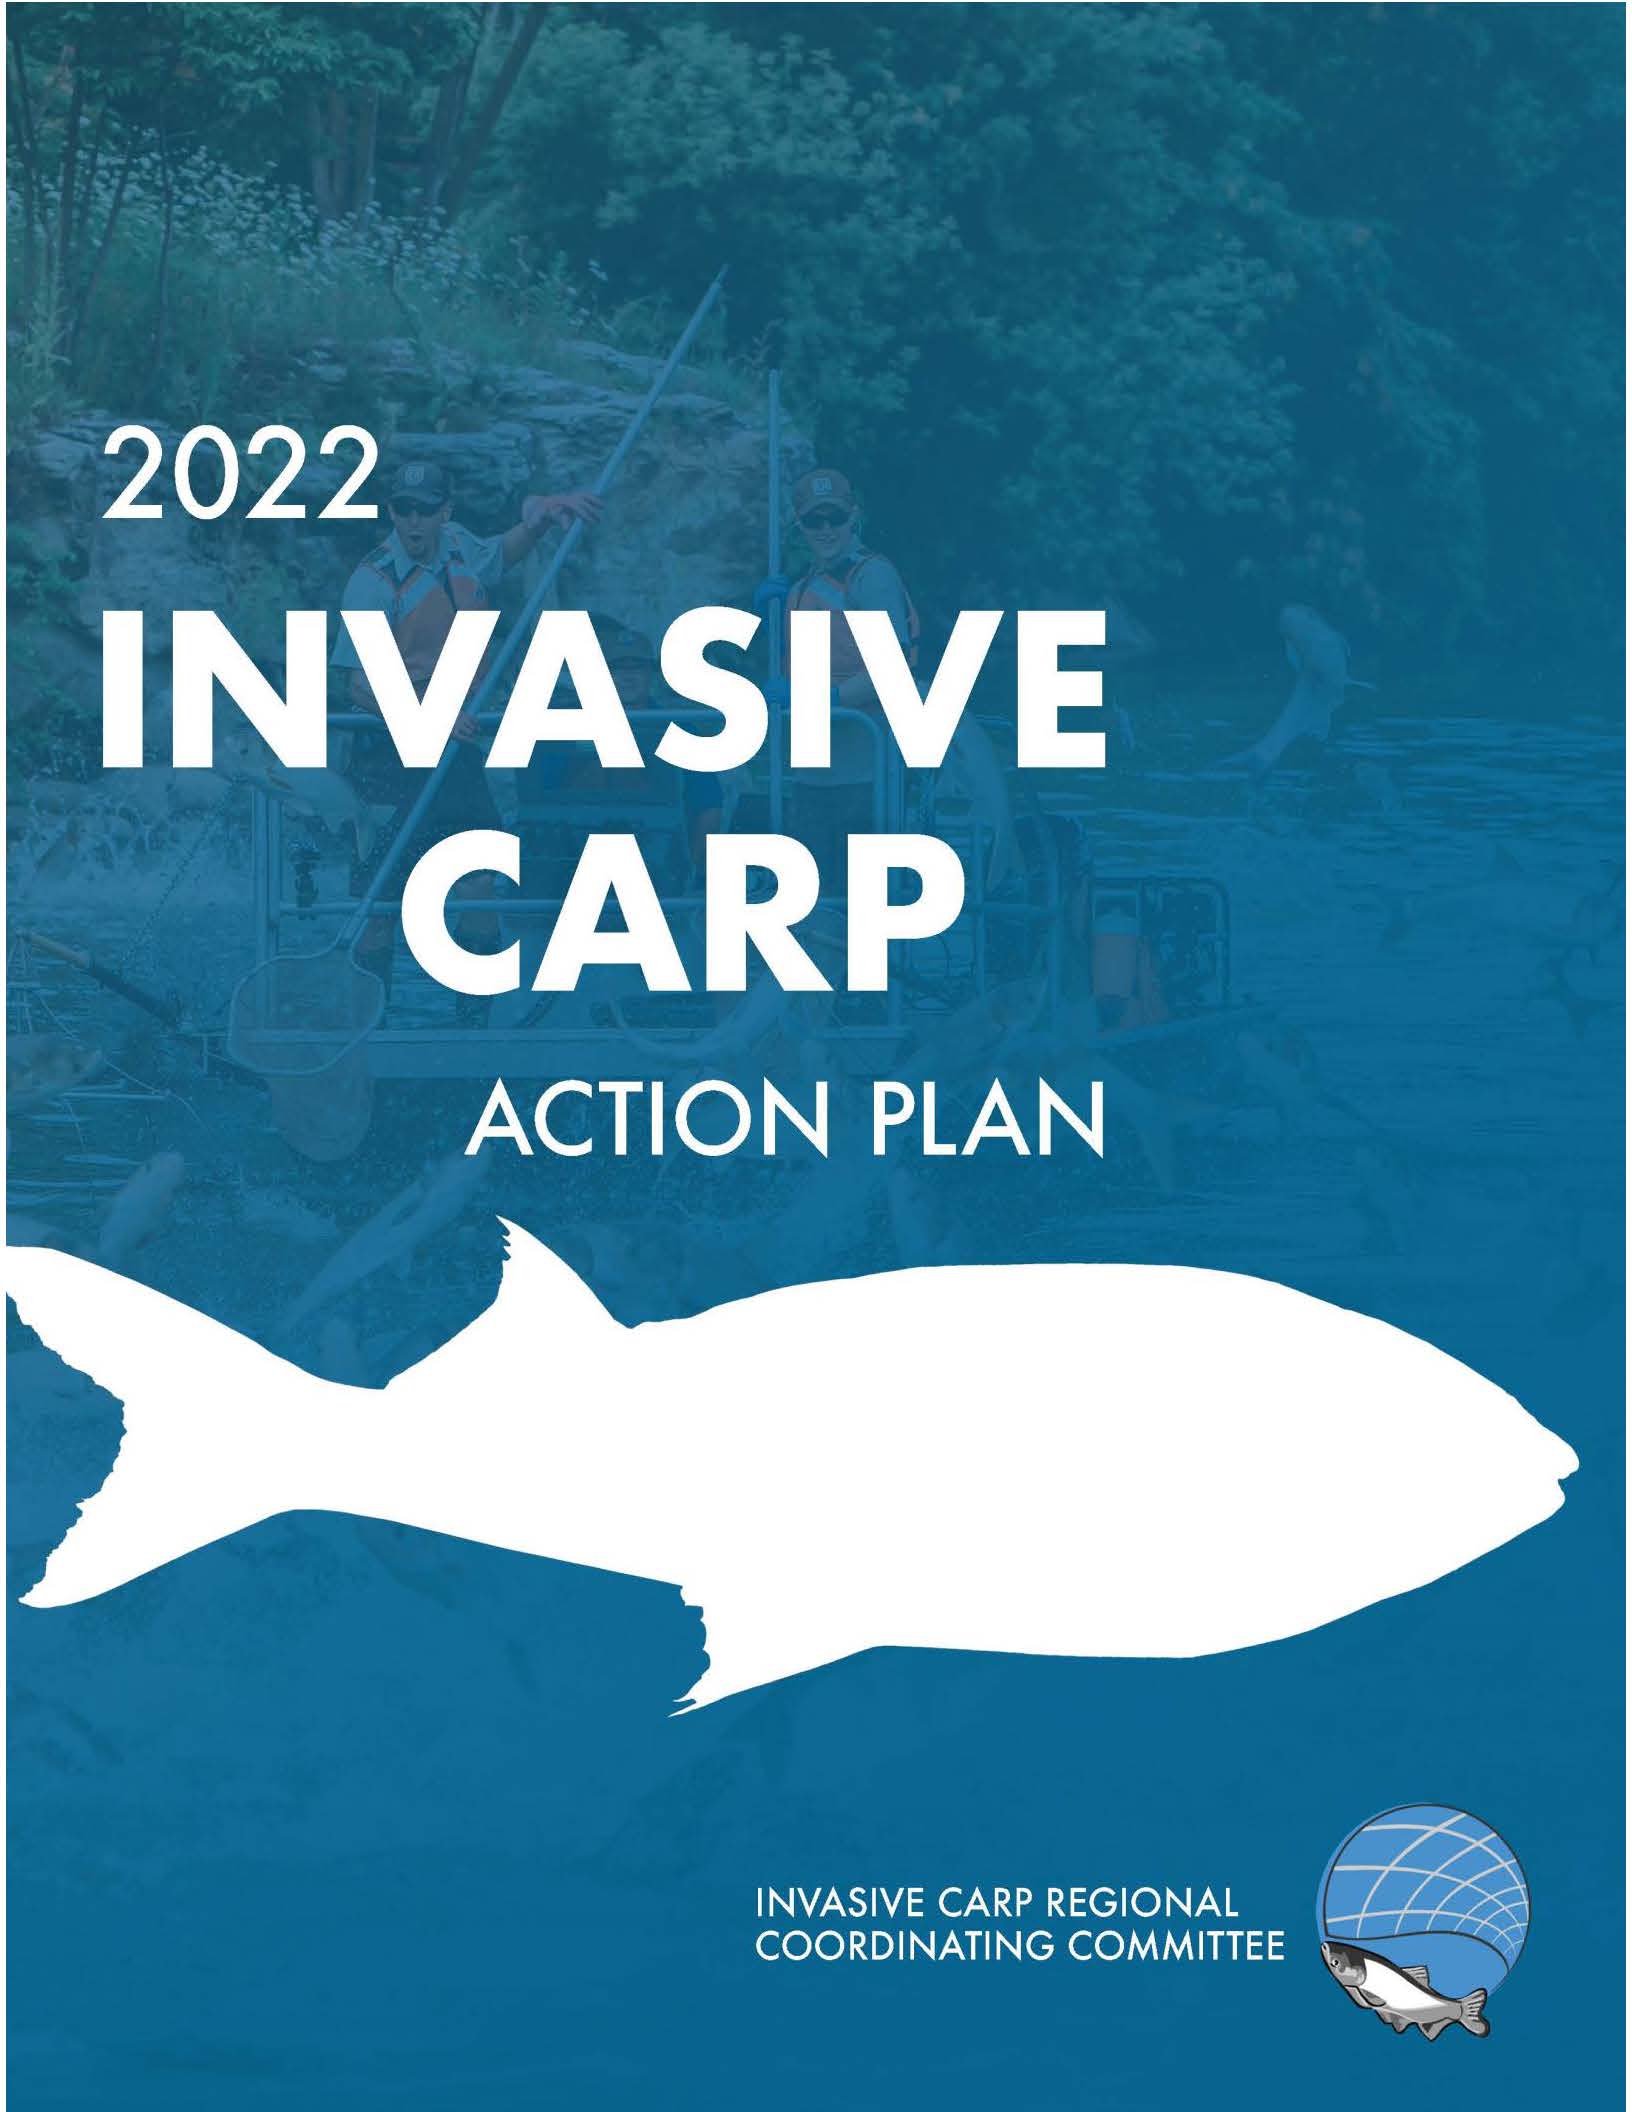 Cover of the 2022 Invasive Carp Action Plan.